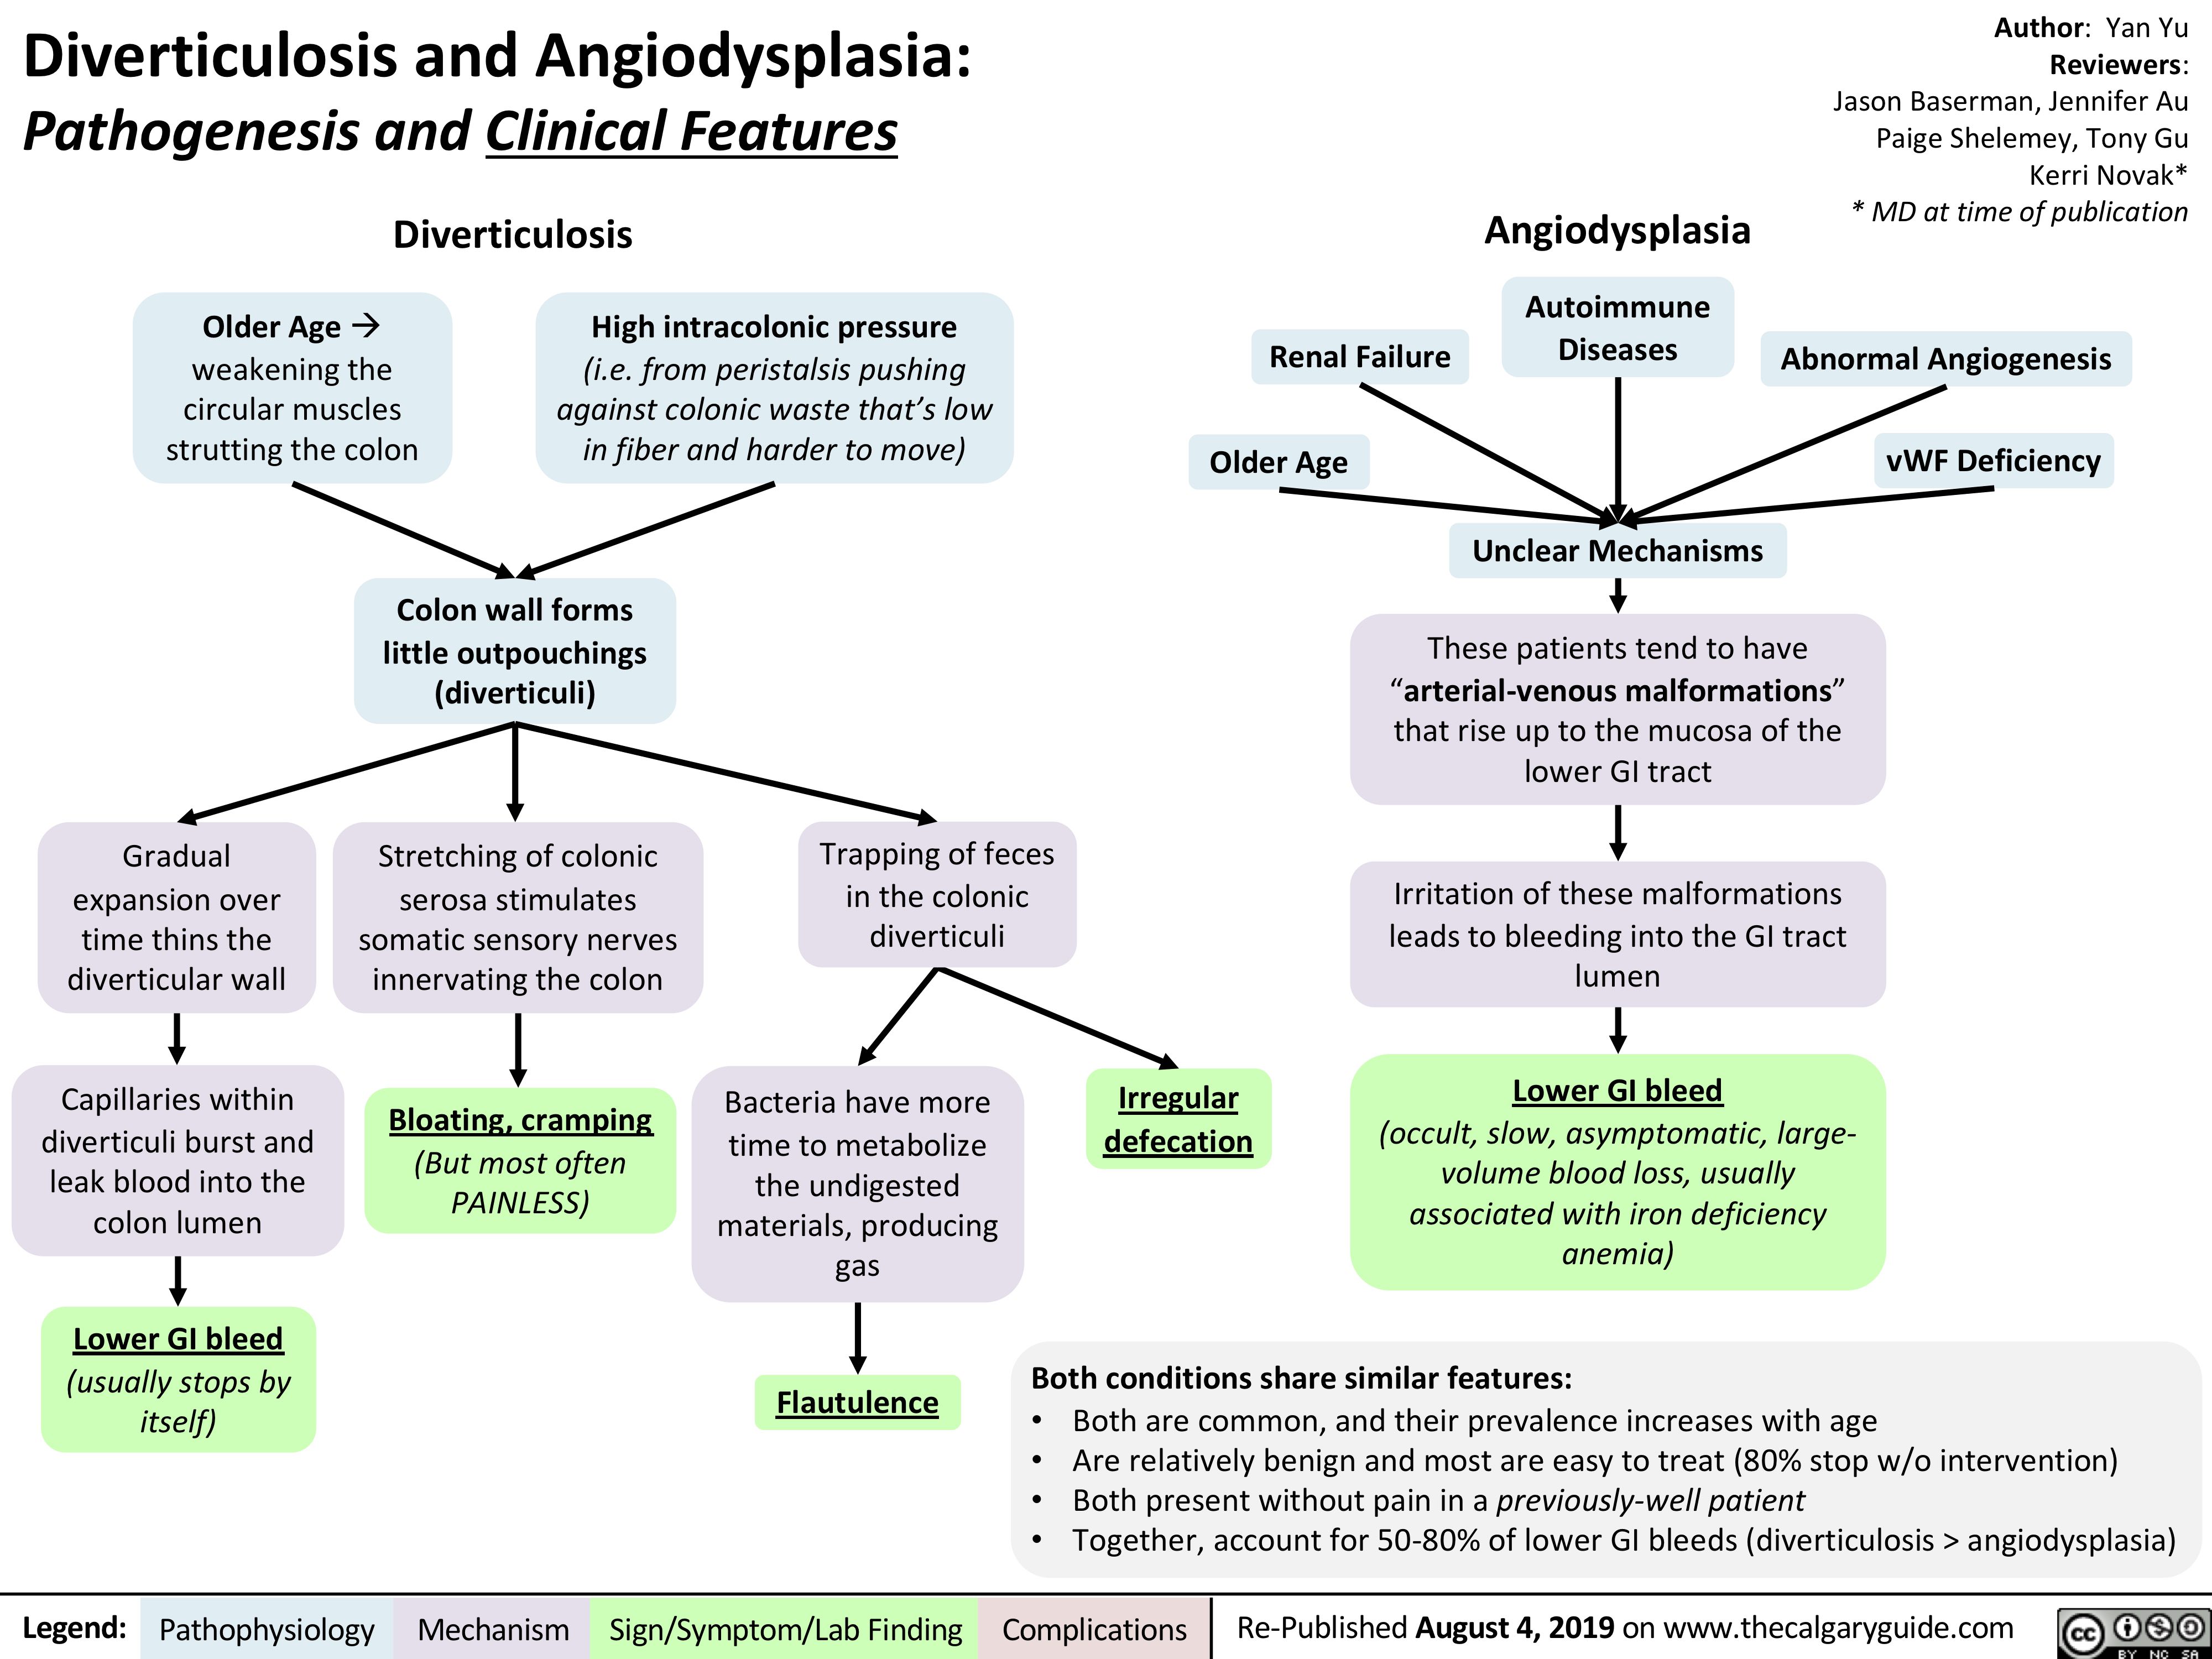 Diverticulosis and Angiodysplasia:
Pathogenesis and Clinical Features
Diverticulosis
Author: Yan Yu Reviewers: Jason Baserman, Jennifer Au Paige Shelemey, Tony Gu Kerri Novak* * MD at time of publication
Abnormal Angiogenesis
vWF Deficiency
    Older Ageà weakening the circular muscles strutting the colon
High intracolonic pressure
(i.e. from peristalsis pushing against colonic waste that’s low in fiber and harder to move)
Angiodysplasia
Autoimmune Diseases
Unclear Mechanisms
These patients tend to have “arterial-venous malformations” that rise up to the mucosa of the lower GI tract
Irritation of these malformations leads to bleeding into the GI tract lumen
Lower GI bleed
(occult, slow, asymptomatic, large- volume blood loss, usually associated with iron deficiency anemia)
  Renal Failure
   Older Age
              Gradual expansion over
time thins the diverticular wall
Capillaries within diverticuli burst and leak blood into the colon lumen
Lower GI bleed
(usually stops by itself)
Colon wall forms little outpouchings (diverticuli)
Stretching of colonic serosa stimulates
somatic sensory nerves innervating the colon
Bloating, cramping
(But most often PAINLESS)
Trapping of feces in the colonic diverticuli
Bacteria have more time to metabolize the undigested materials, producing gas
Flautulence
Irregular defecation
                  Both conditions share similar features:
 • Both are common, and their prevalence increases with age
• Are relatively benign and most are easy to treat (80% stop w/o intervention)
• Both present without pain in a previously-well patient
• Together, account for 50-80% of lower GI bleeds (diverticulosis > angiodysplasia)
  Legend:
 Pathophysiology
 Mechanism
Sign/Symptom/Lab Finding
  Complications
Re-Published August 4, 2019 on www.thecalgaryguide.com
   